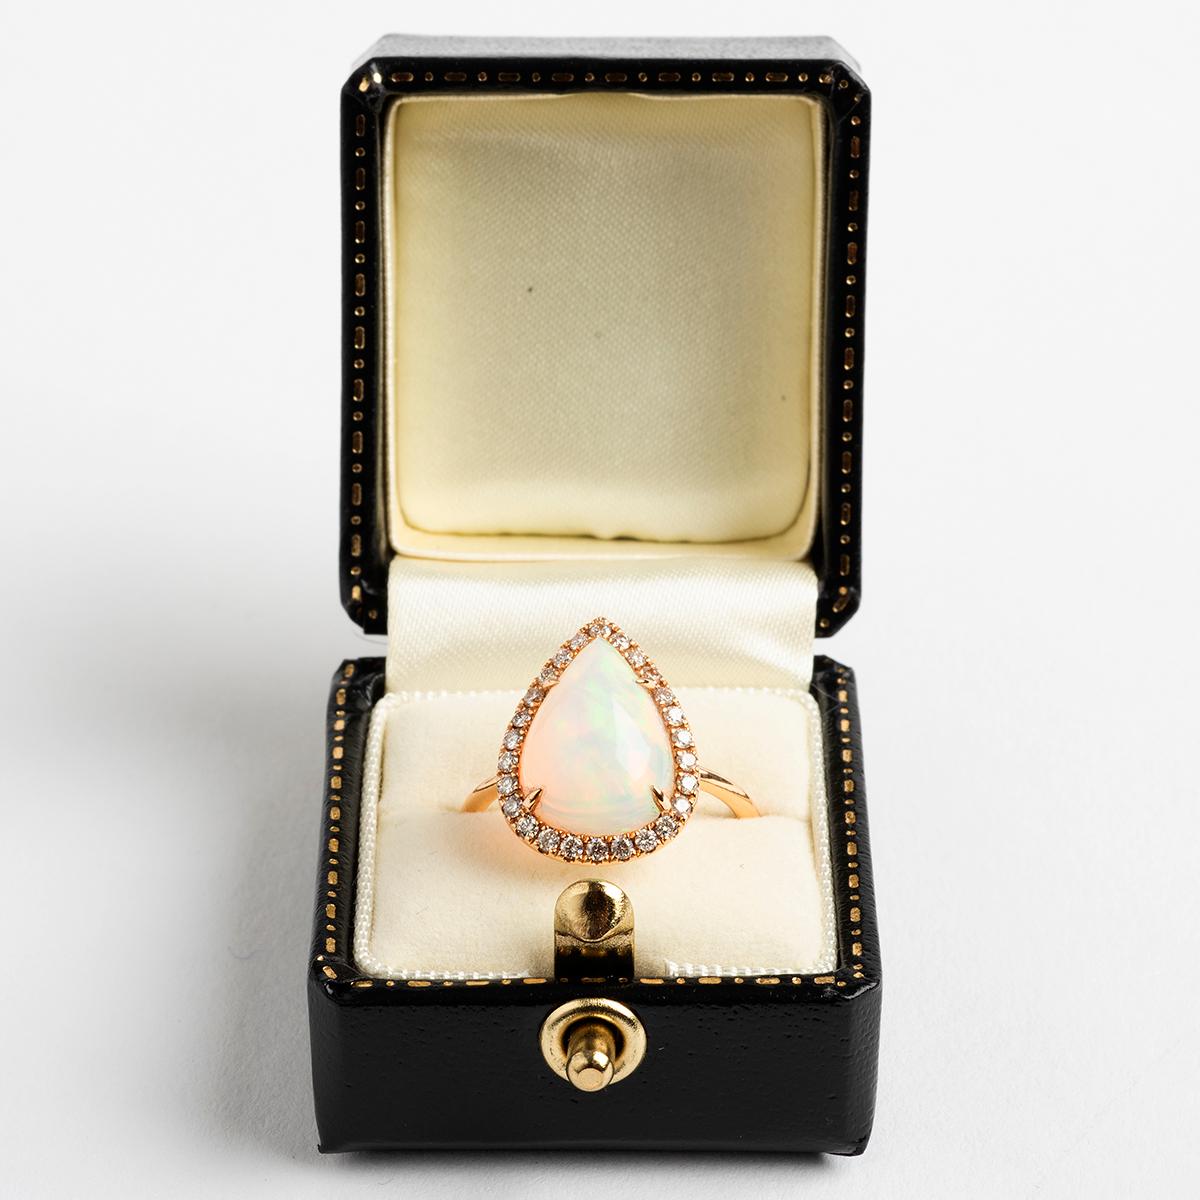 Our wonderful, large and attractive 18k rose gold dress ring features a pear shaped opal (est. 3.67carat) and diamonds (est. .29carat). Certain to centre conversation, this versatile ring adds to any attire. Hallmarked London, 2019, this ring is